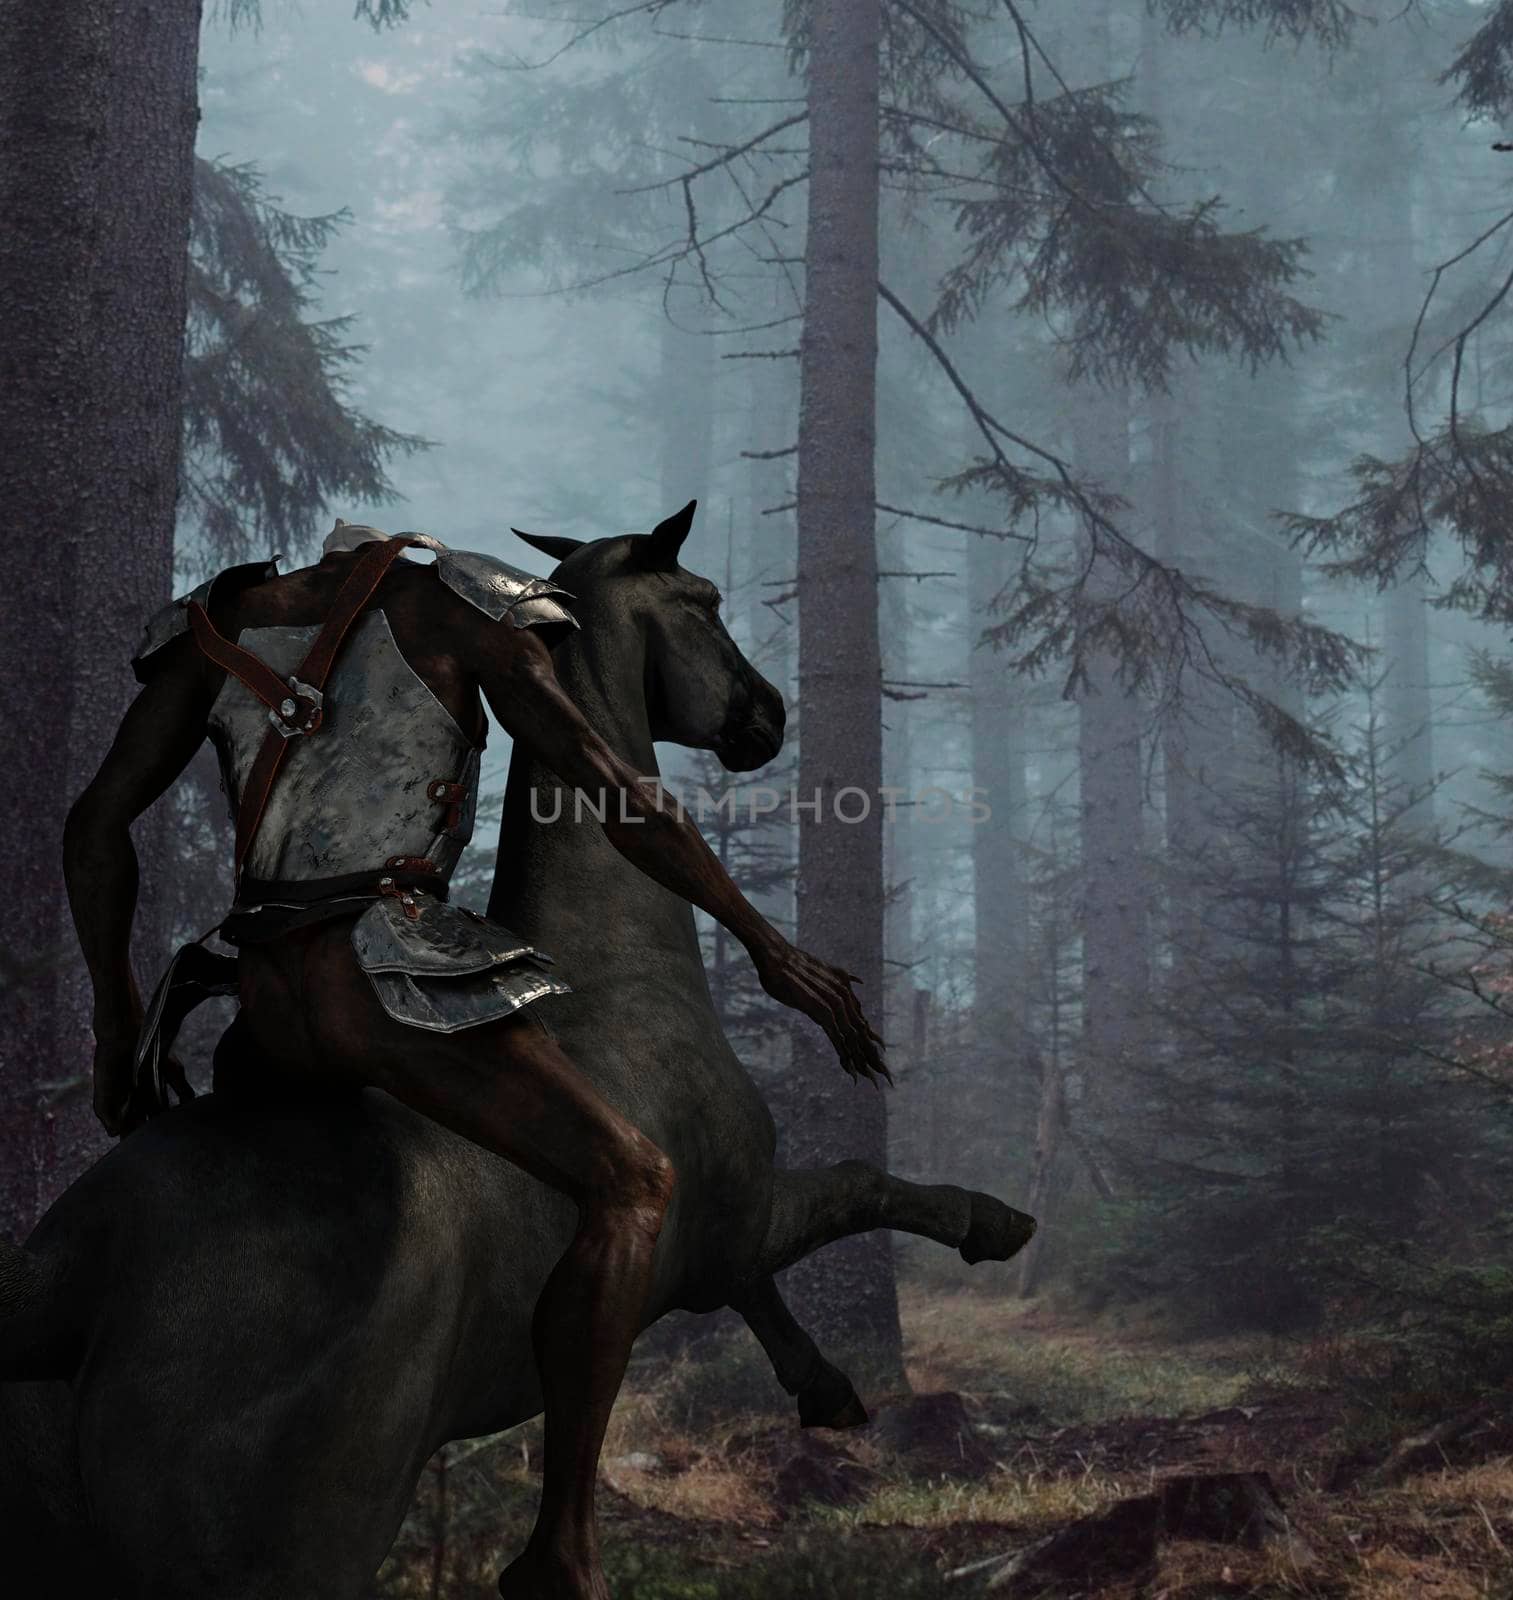 Headless horseman riding a black horse in the forest by ankarb